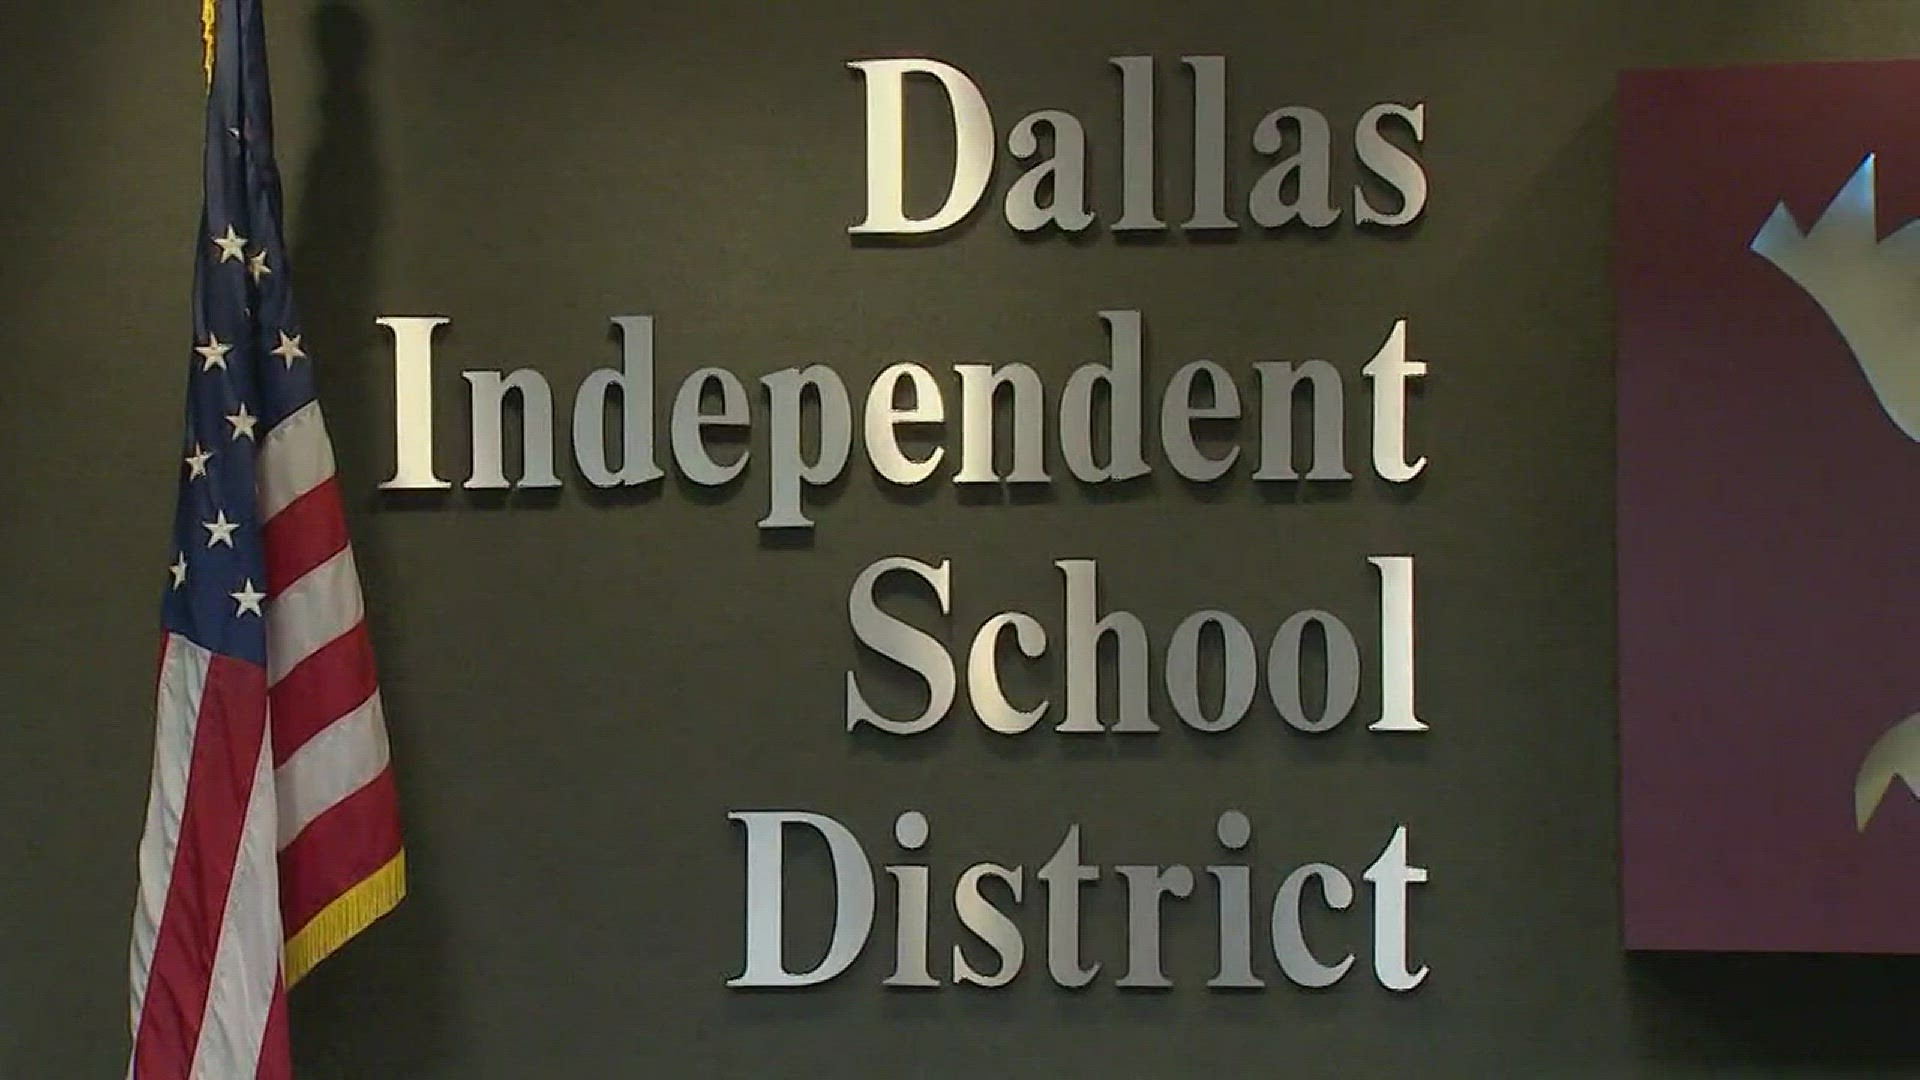 Ahead of students heading back to school, this past Friday the DISD school board debated a vote that would have allowed taxpayers to be able to vote on a 13-cent or a six-cent tax increase or two-cent tax swap for Dallas' public schools. The Board of trus